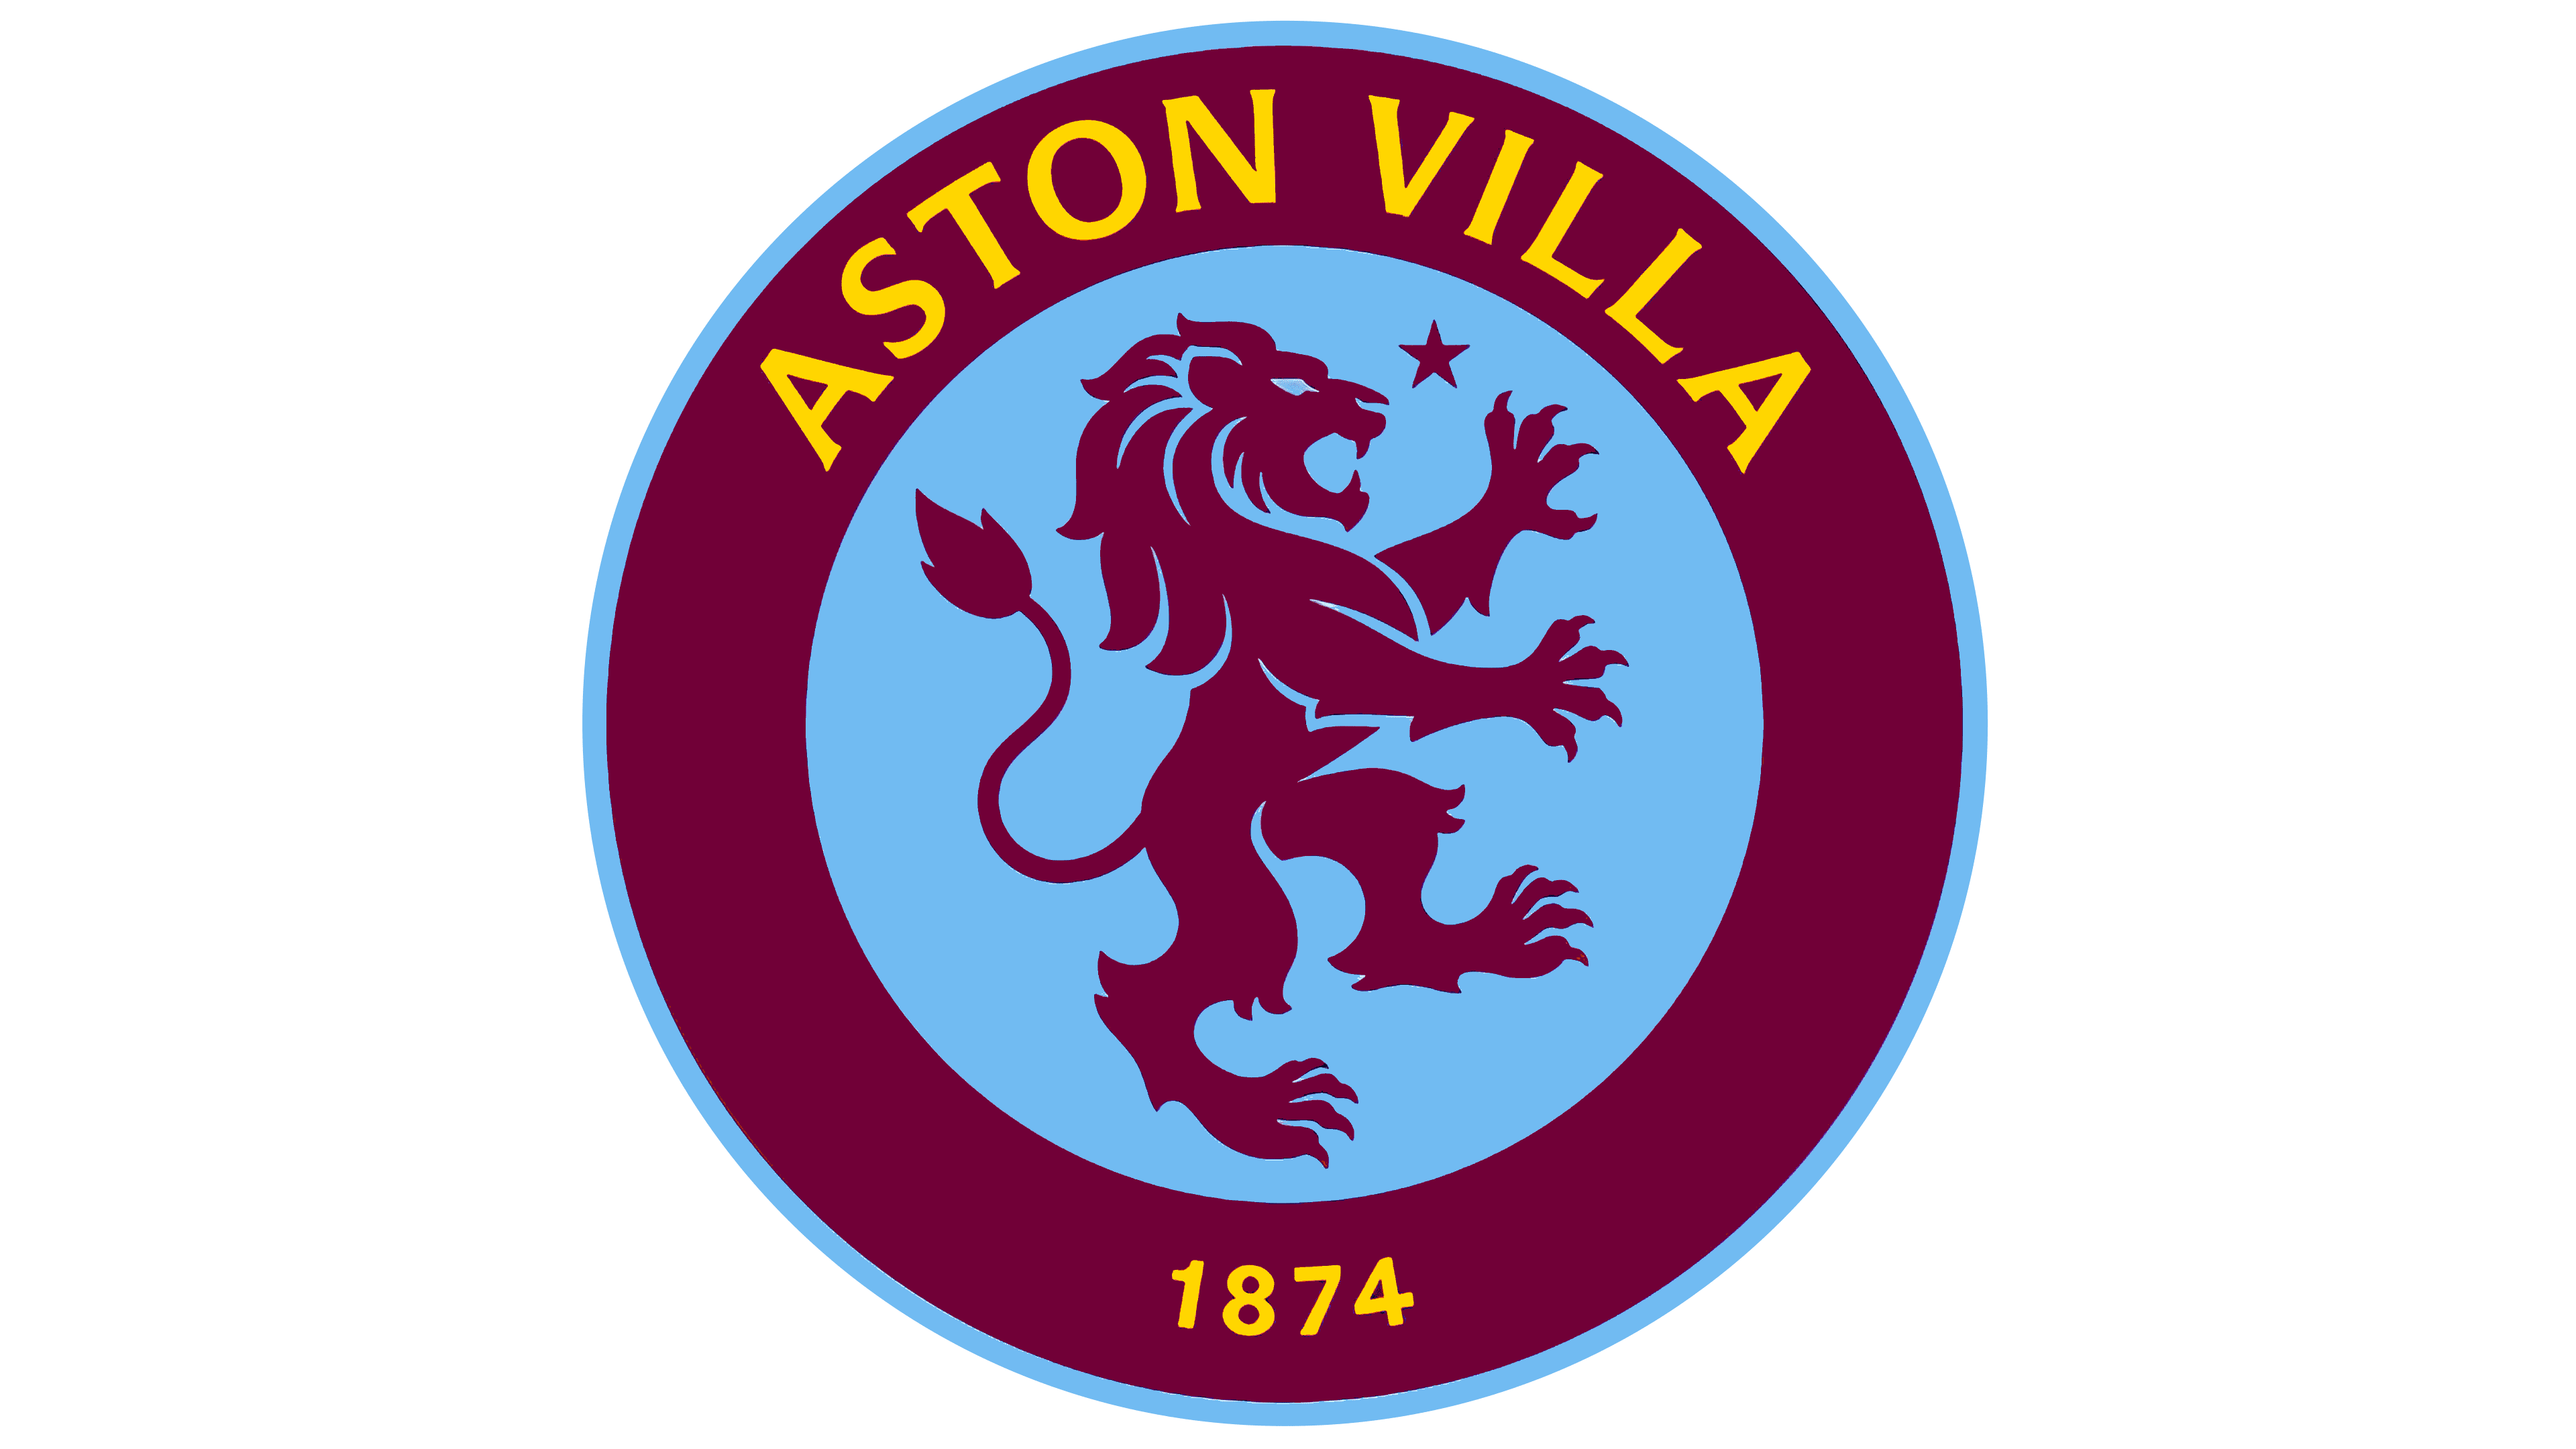 JUST NOW: Aston Villa Operations Director shares his brilliant memories of his time at Villa Park…